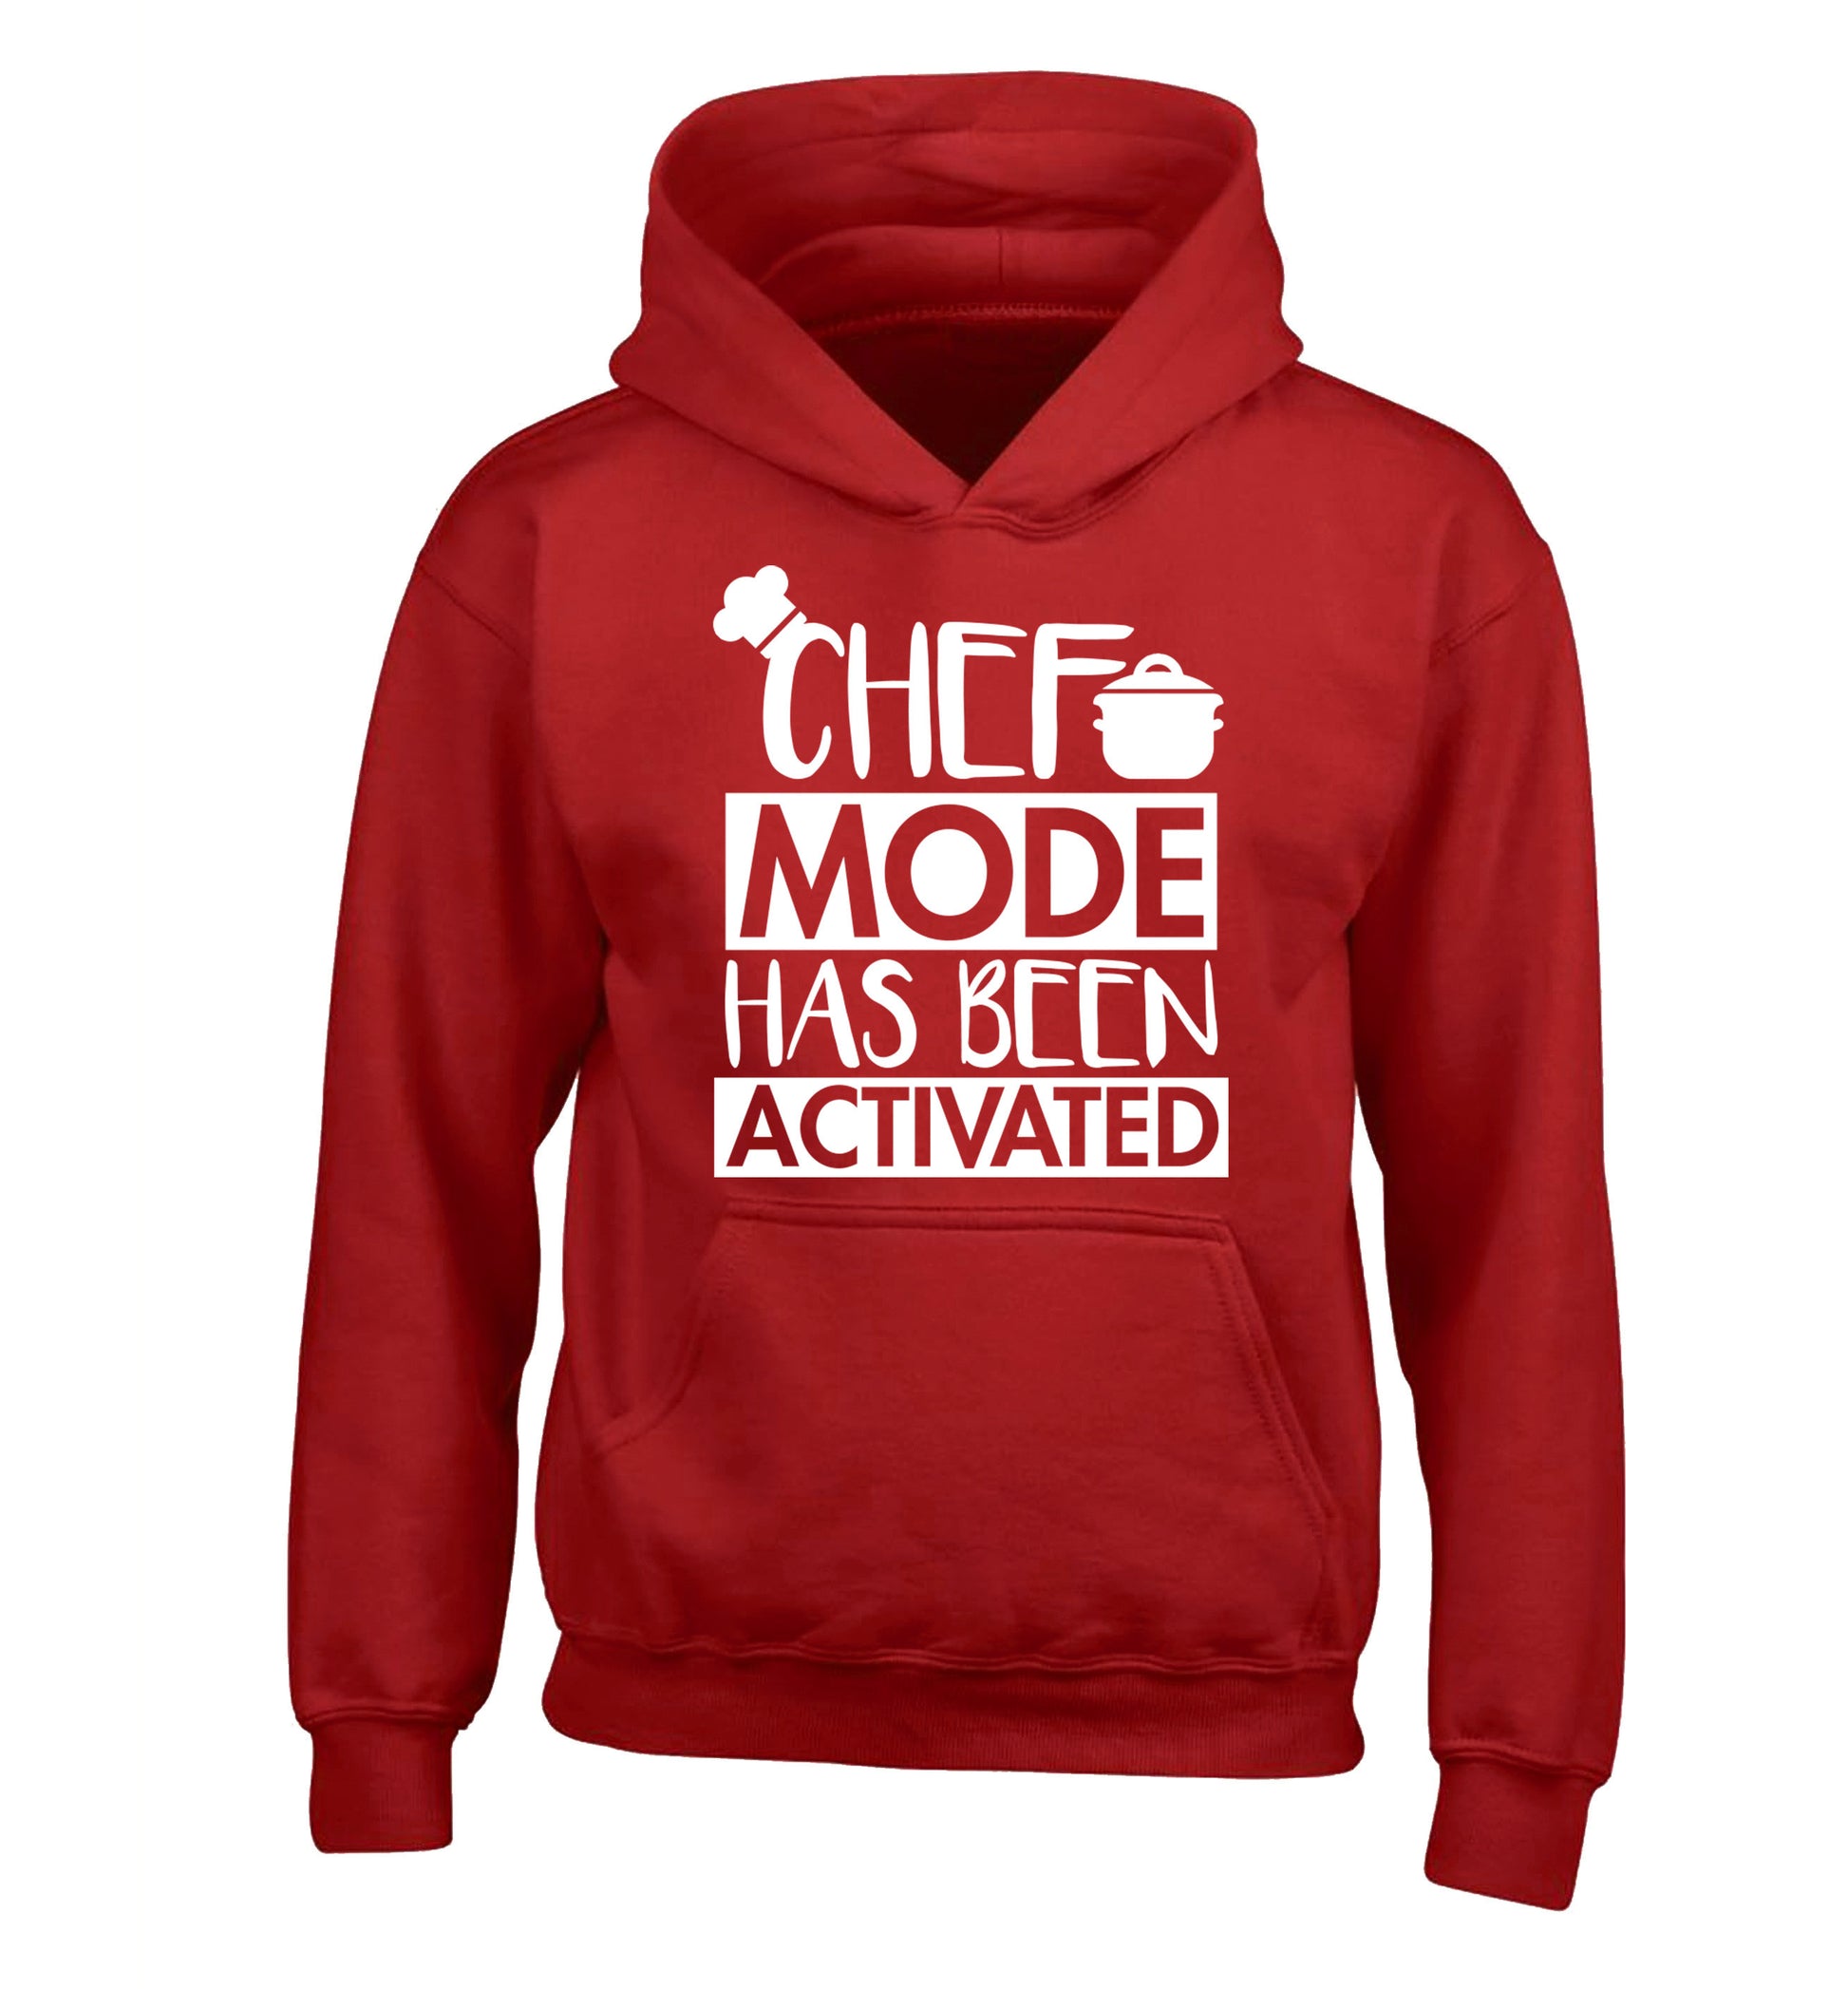 Chef mode has been activated children's red hoodie 12-14 Years